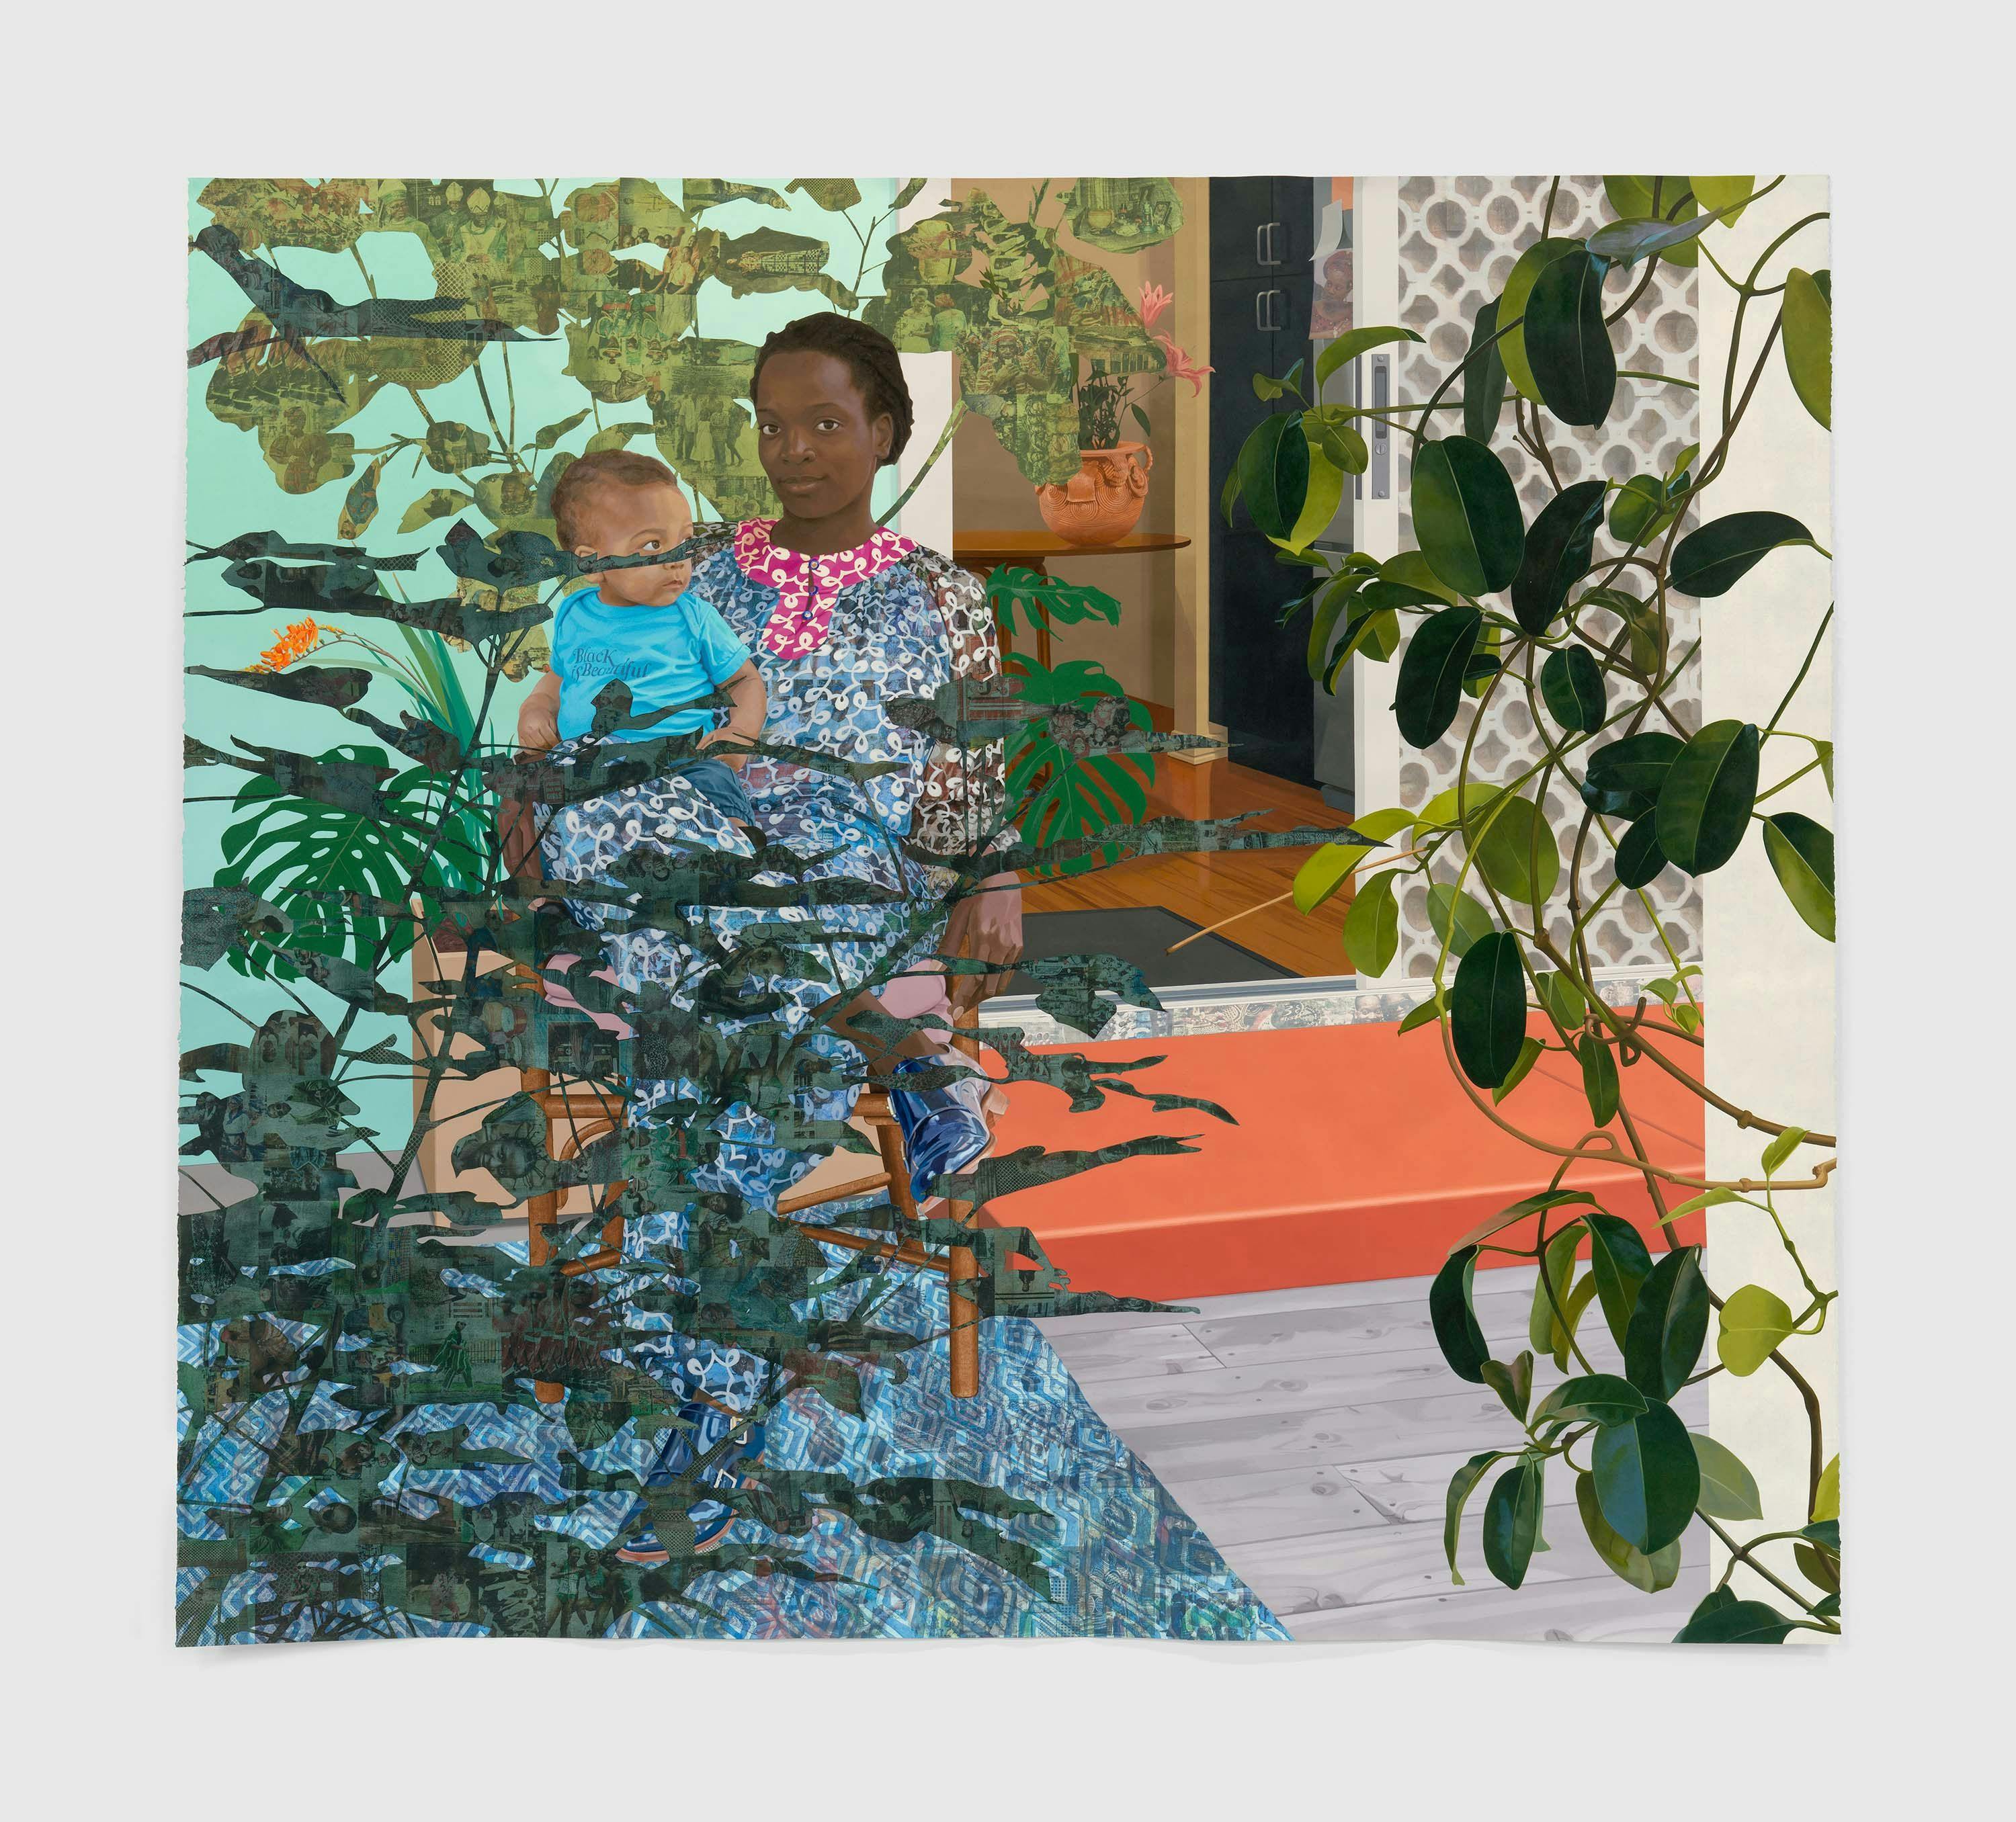 A work on paper by Njideka Akunyili Crosby, titled Still You Bloom in This Land of No Gardens, dated 2021.